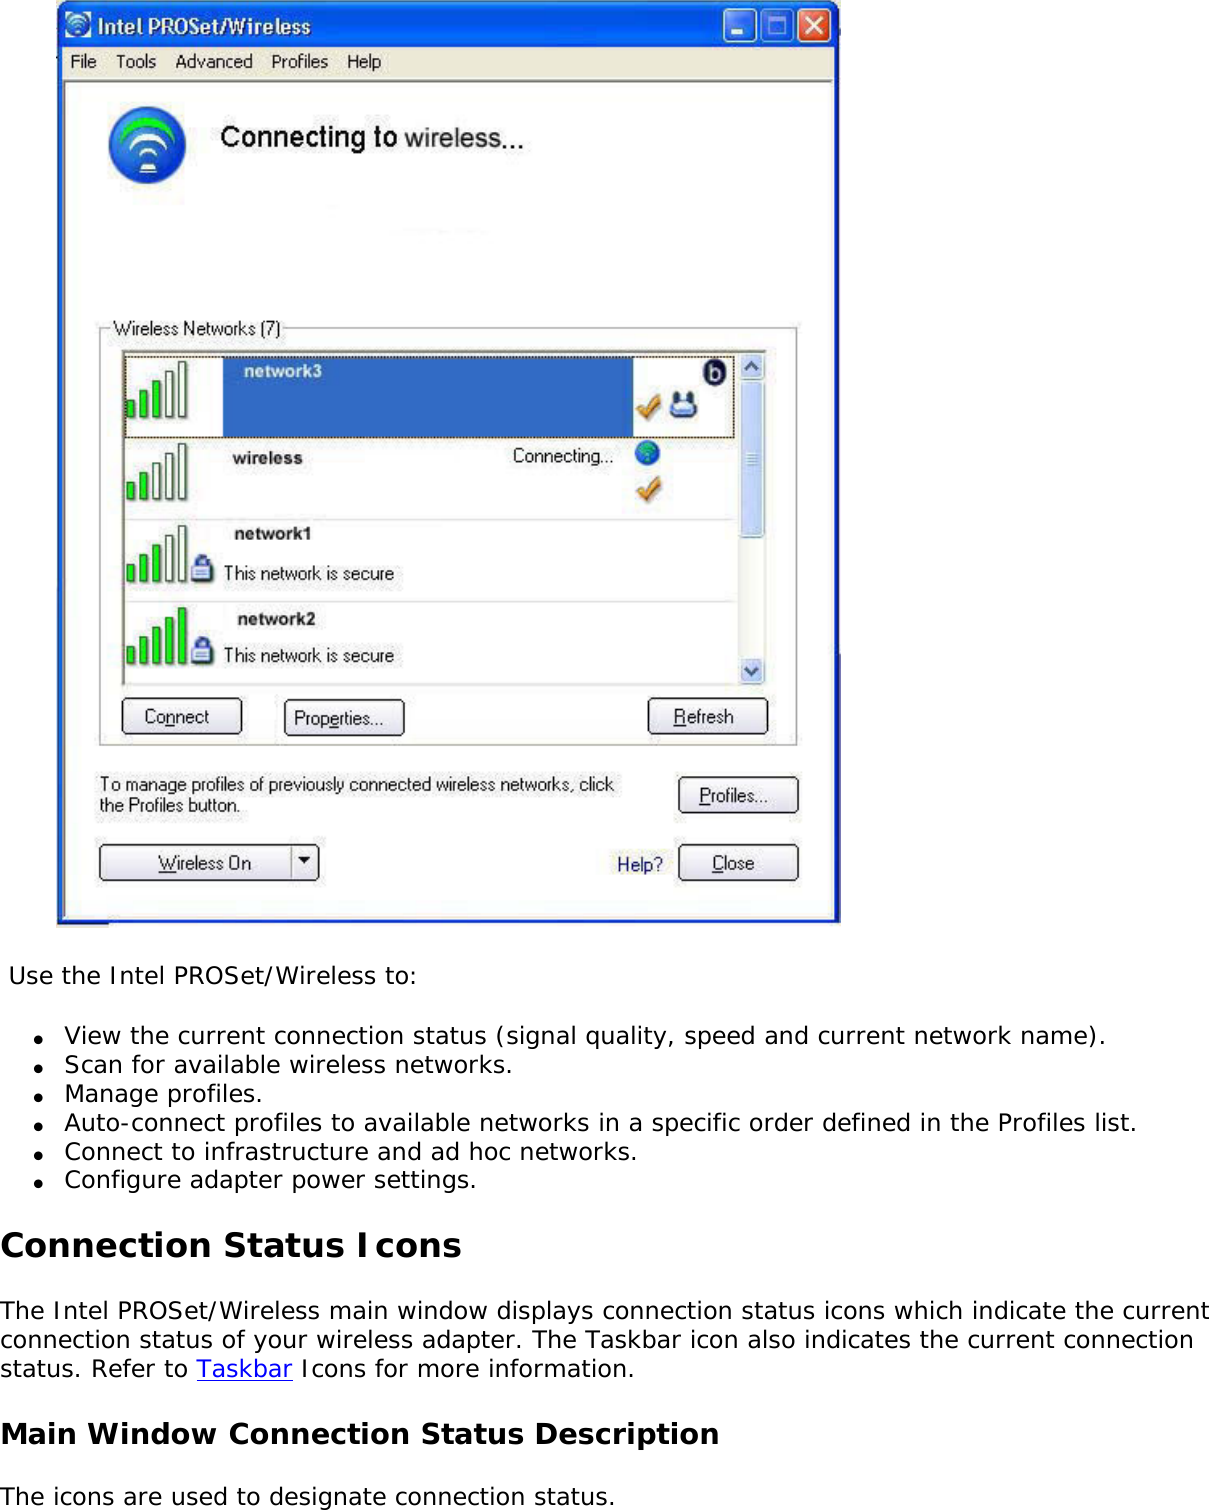   Use the Intel PROSet/Wireless to: ●     View the current connection status (signal quality, speed and current network name).●     Scan for available wireless networks.●     Manage profiles.●     Auto-connect profiles to available networks in a specific order defined in the Profiles list.●     Connect to infrastructure and ad hoc networks.●     Configure adapter power settings.Connection Status IconsThe Intel PROSet/Wireless main window displays connection status icons which indicate the current connection status of your wireless adapter. The Taskbar icon also indicates the current connection status. Refer to Taskbar Icons for more information. Main Window Connection Status Description The icons are used to designate connection status. 